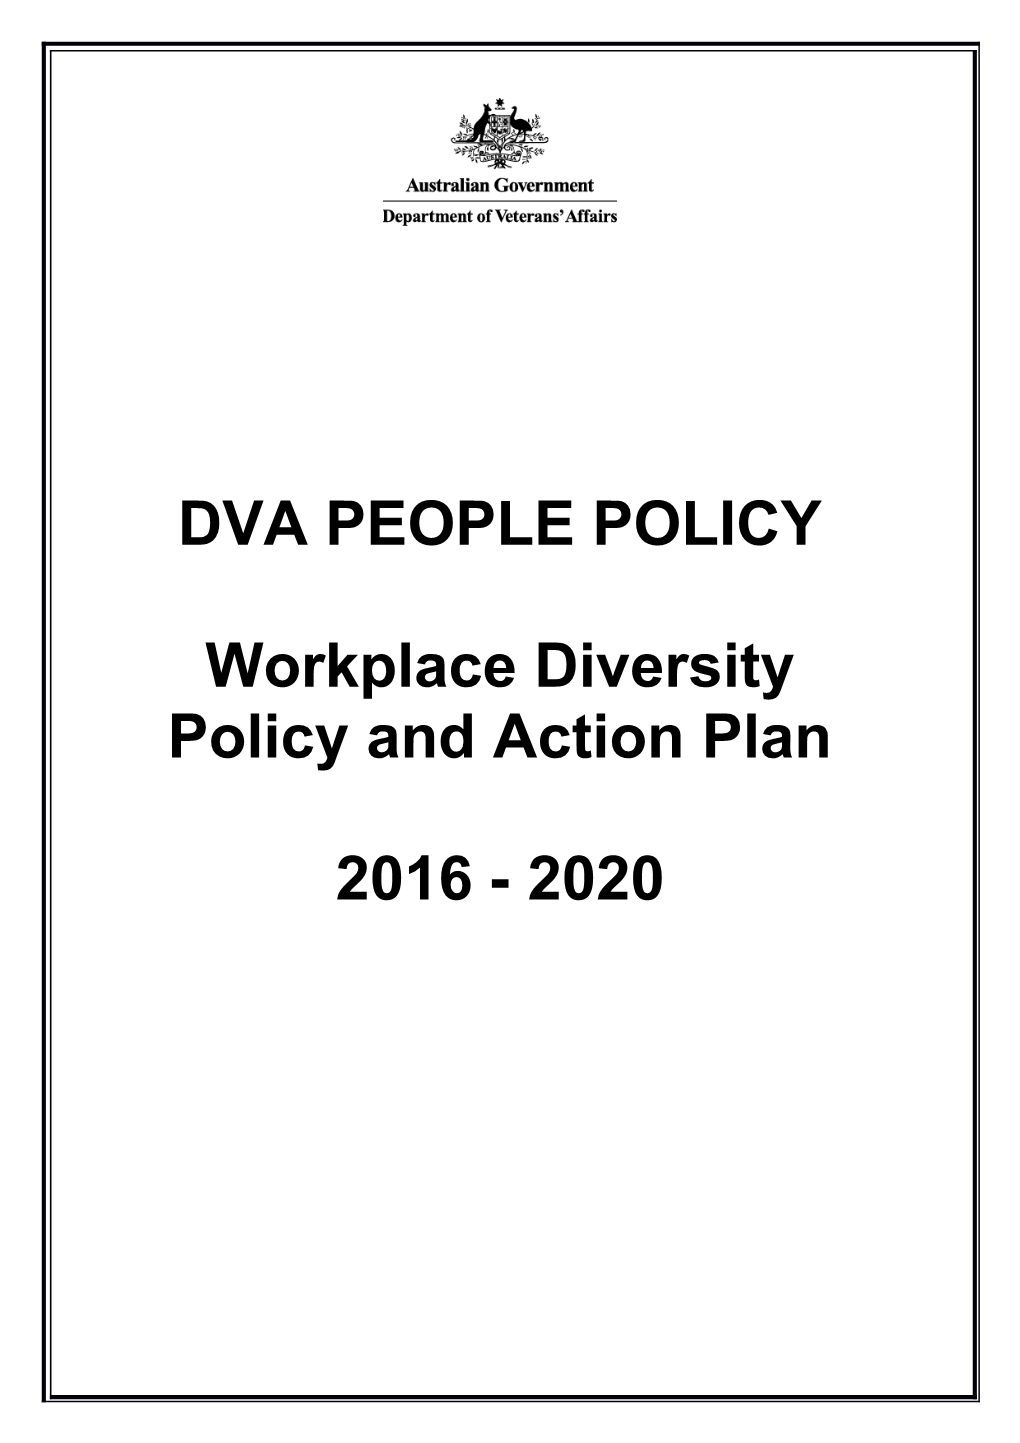 Workplace Diversity Policy and Action Plan